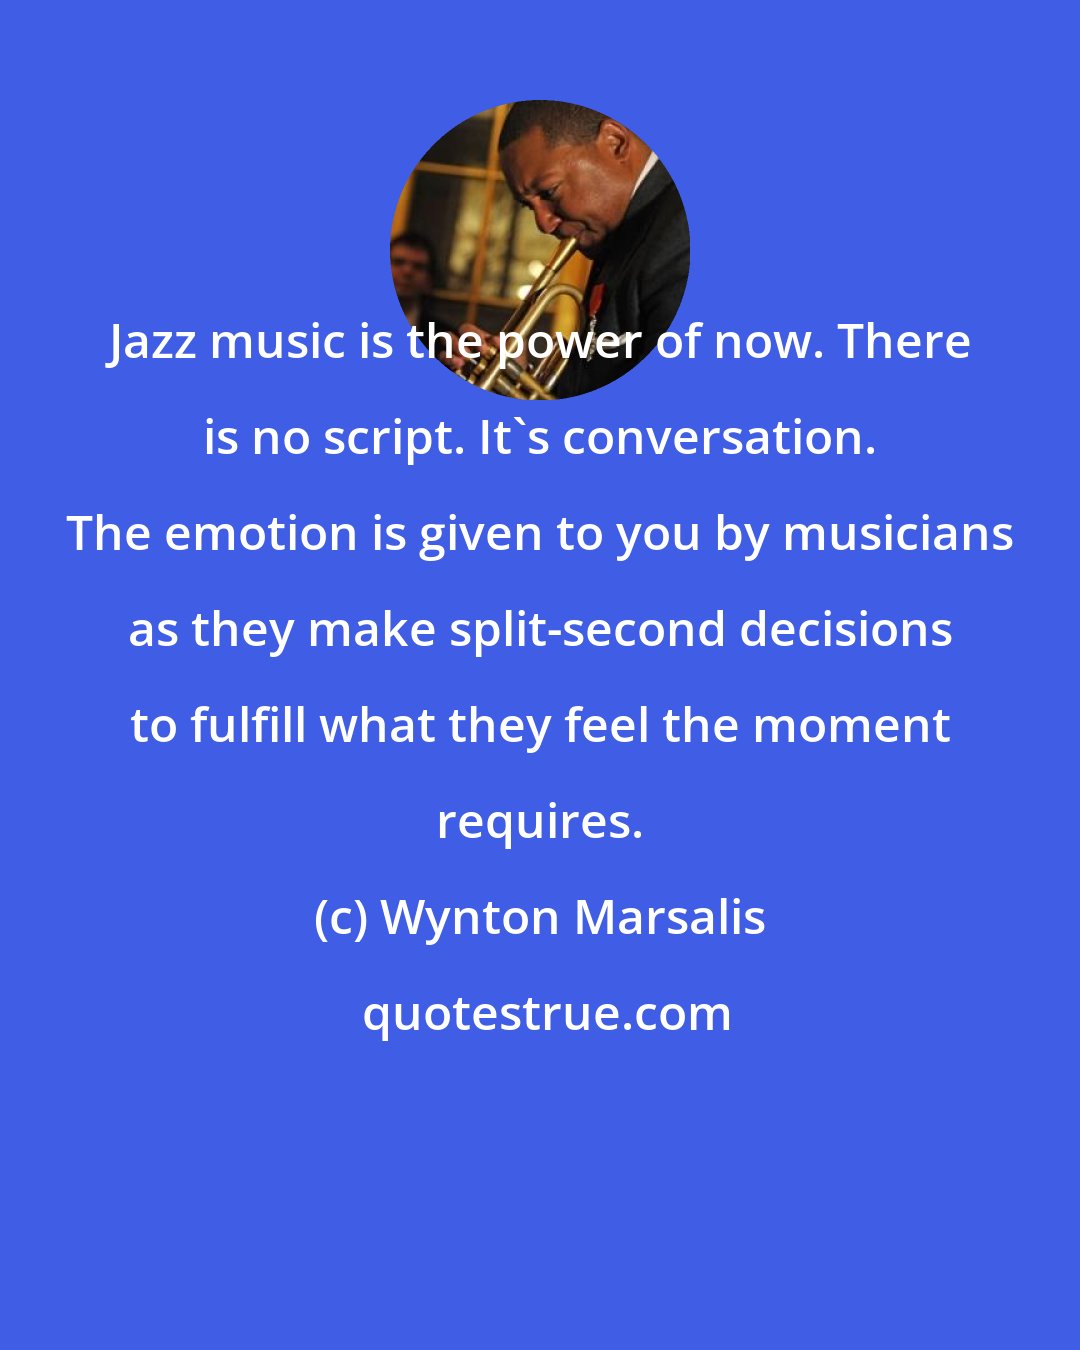 Wynton Marsalis: Jazz music is the power of now. There is no script. It's conversation. The emotion is given to you by musicians as they make split-second decisions to fulfill what they feel the moment requires.